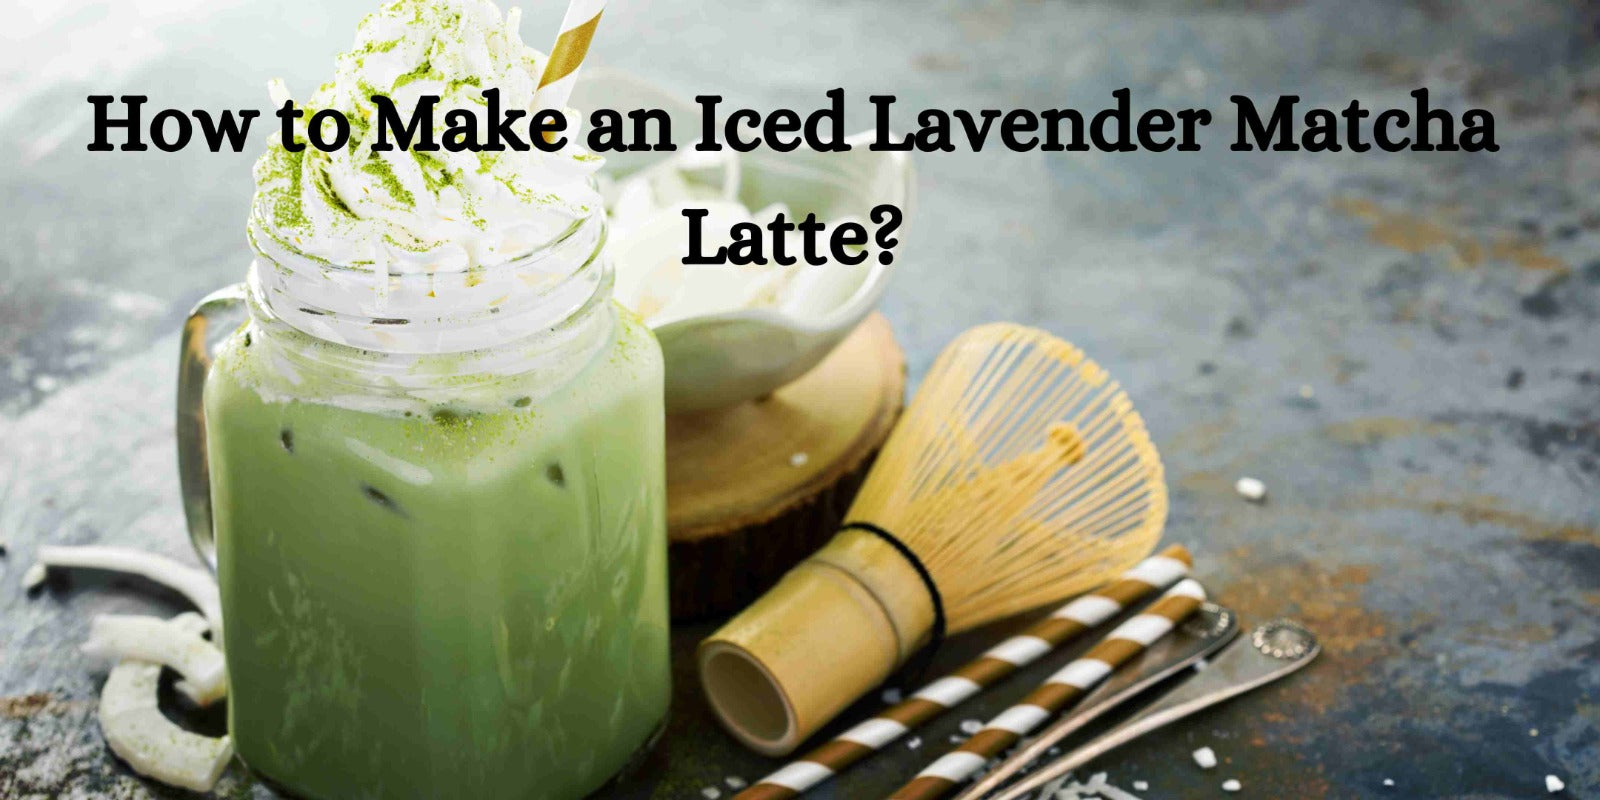 How to Make an Iced Lavender Matcha Latte?